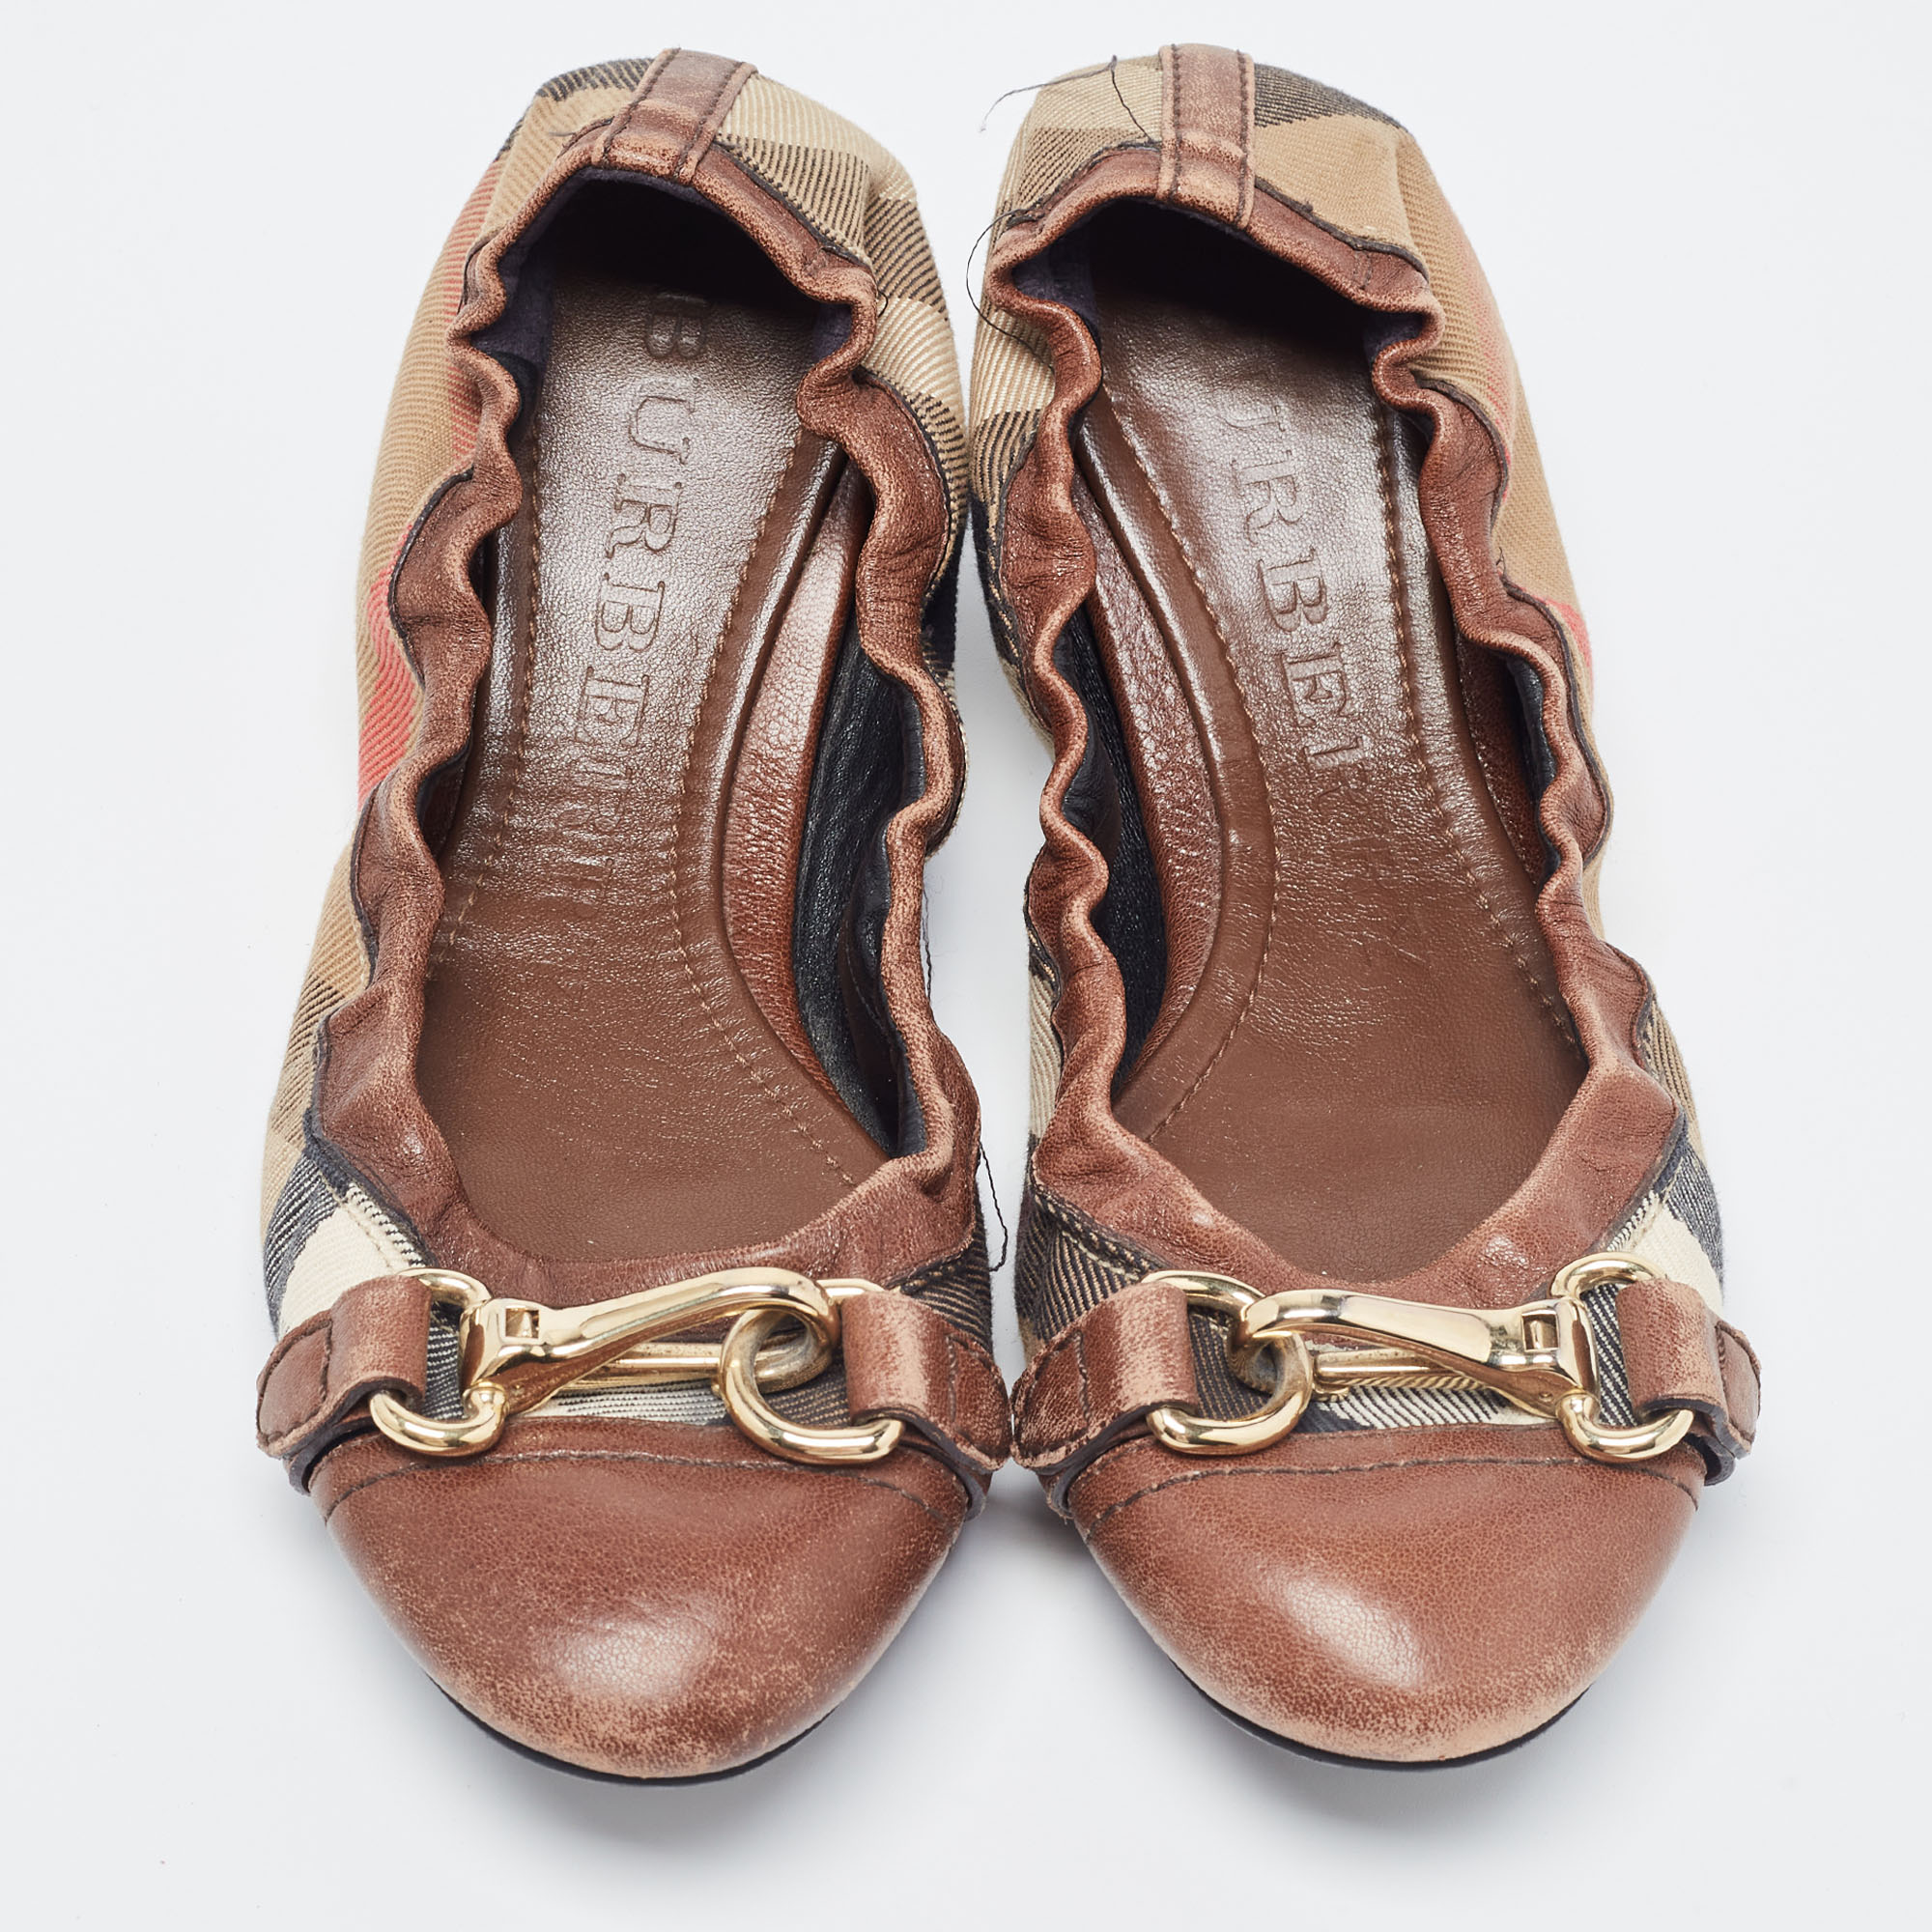 Burberry Brown/Beige Leather And Nova Check Canvas Scrunch Ballet Flats Size 37